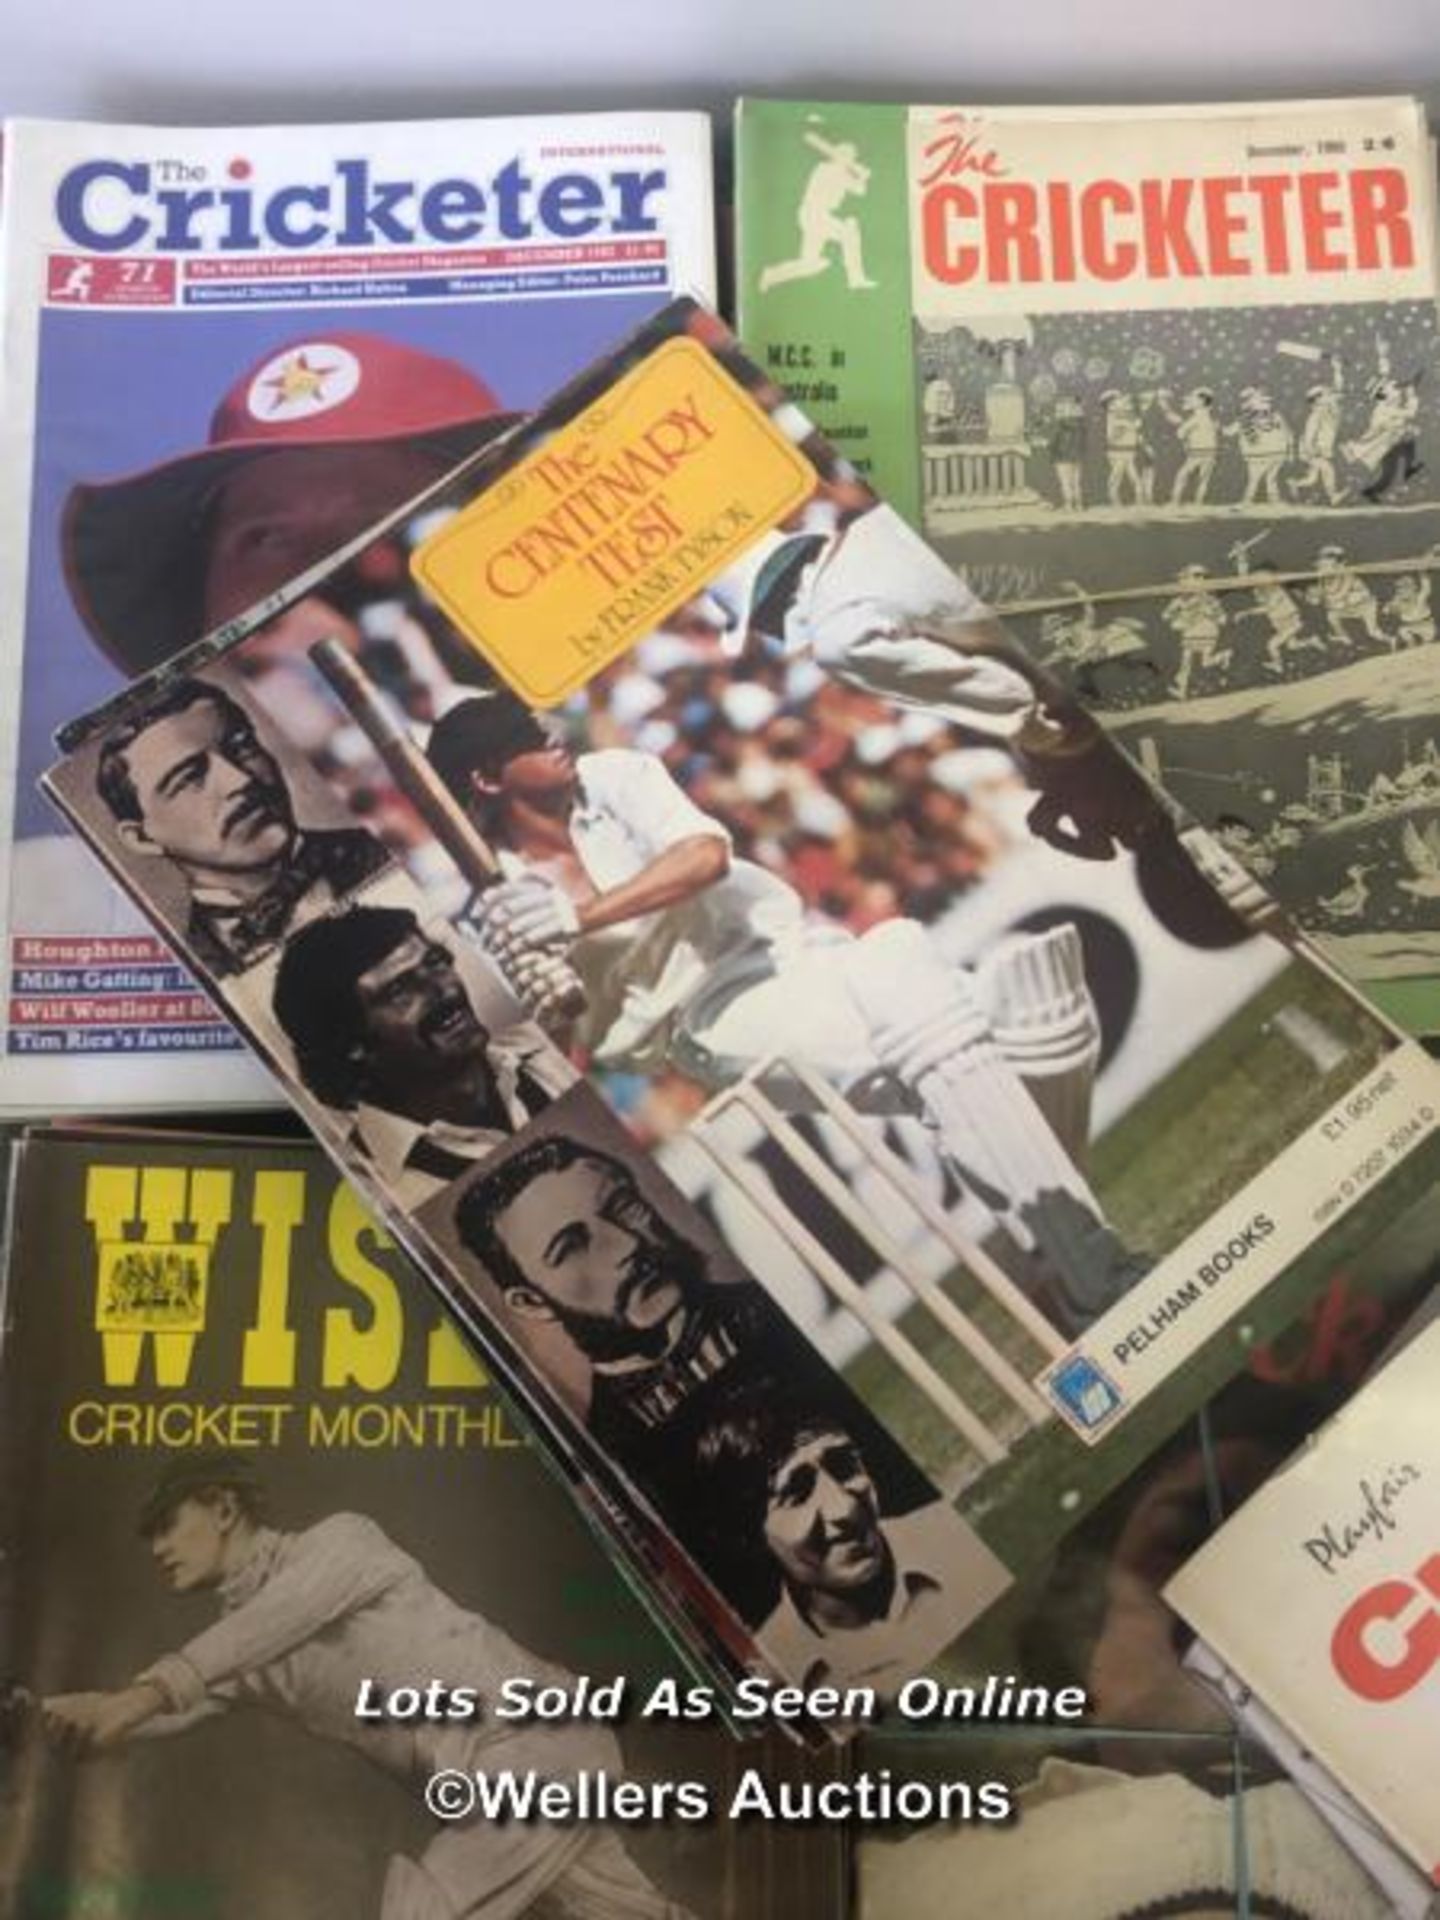 COLLECTION OF MAGAZINES, MAINLY 'THE CRICKETER' - Image 2 of 4